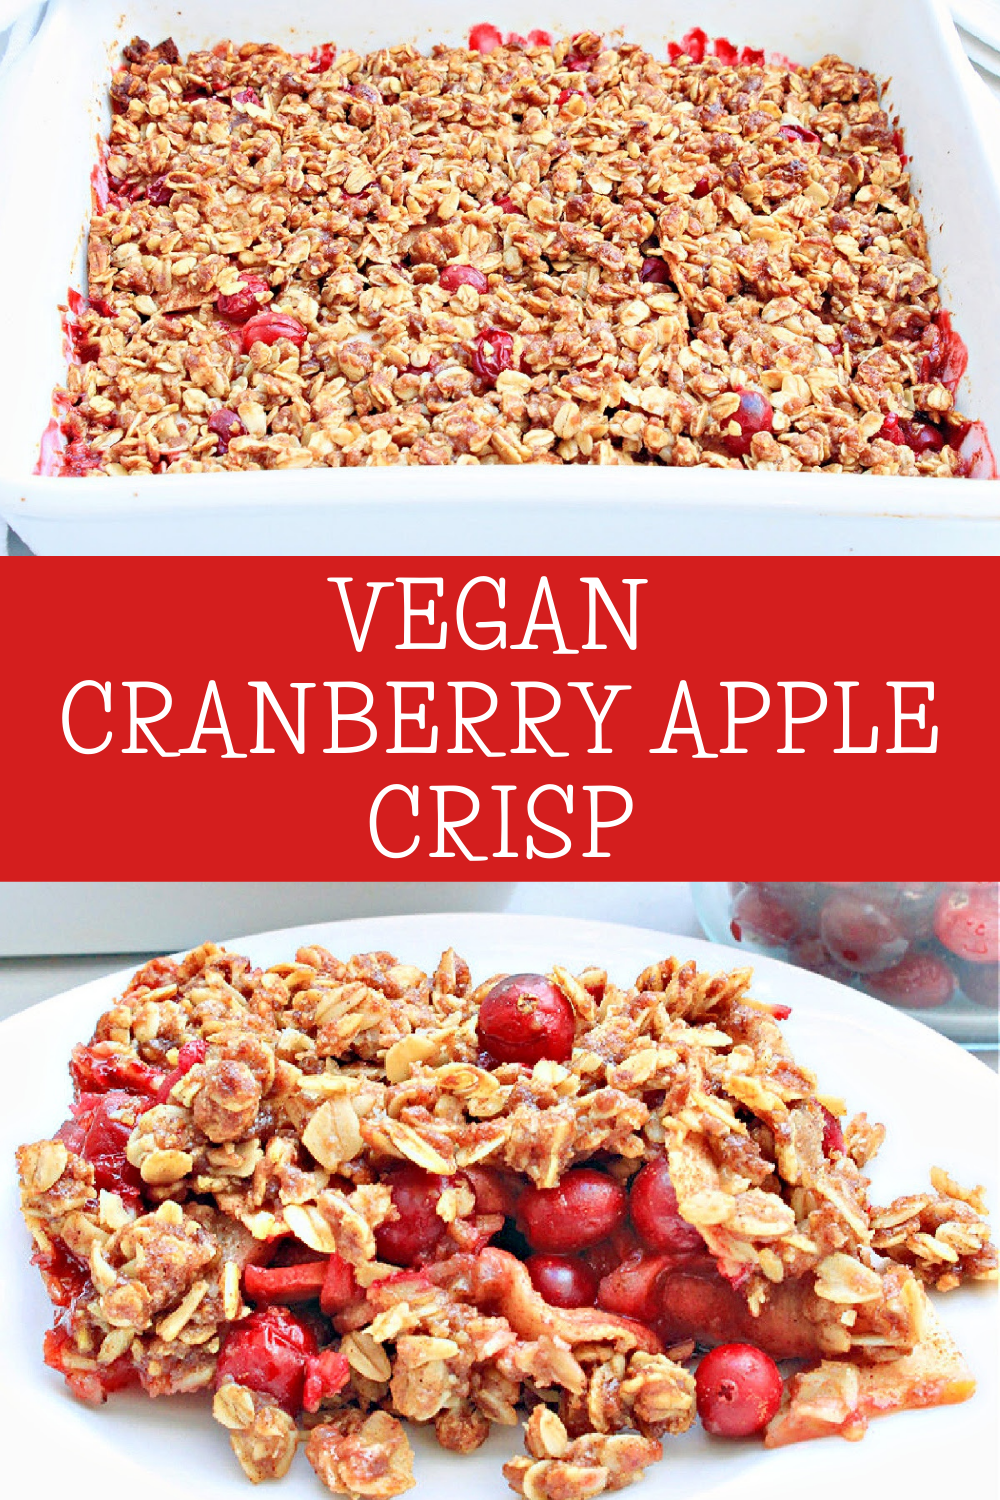 Cranberry Apple Crisp ~ You'll love this easy dessert that celebrates the flavors of fall with sweet apples, tart cranberries, seasonal spices, and a buttery oat topping! via @thiswifecooks